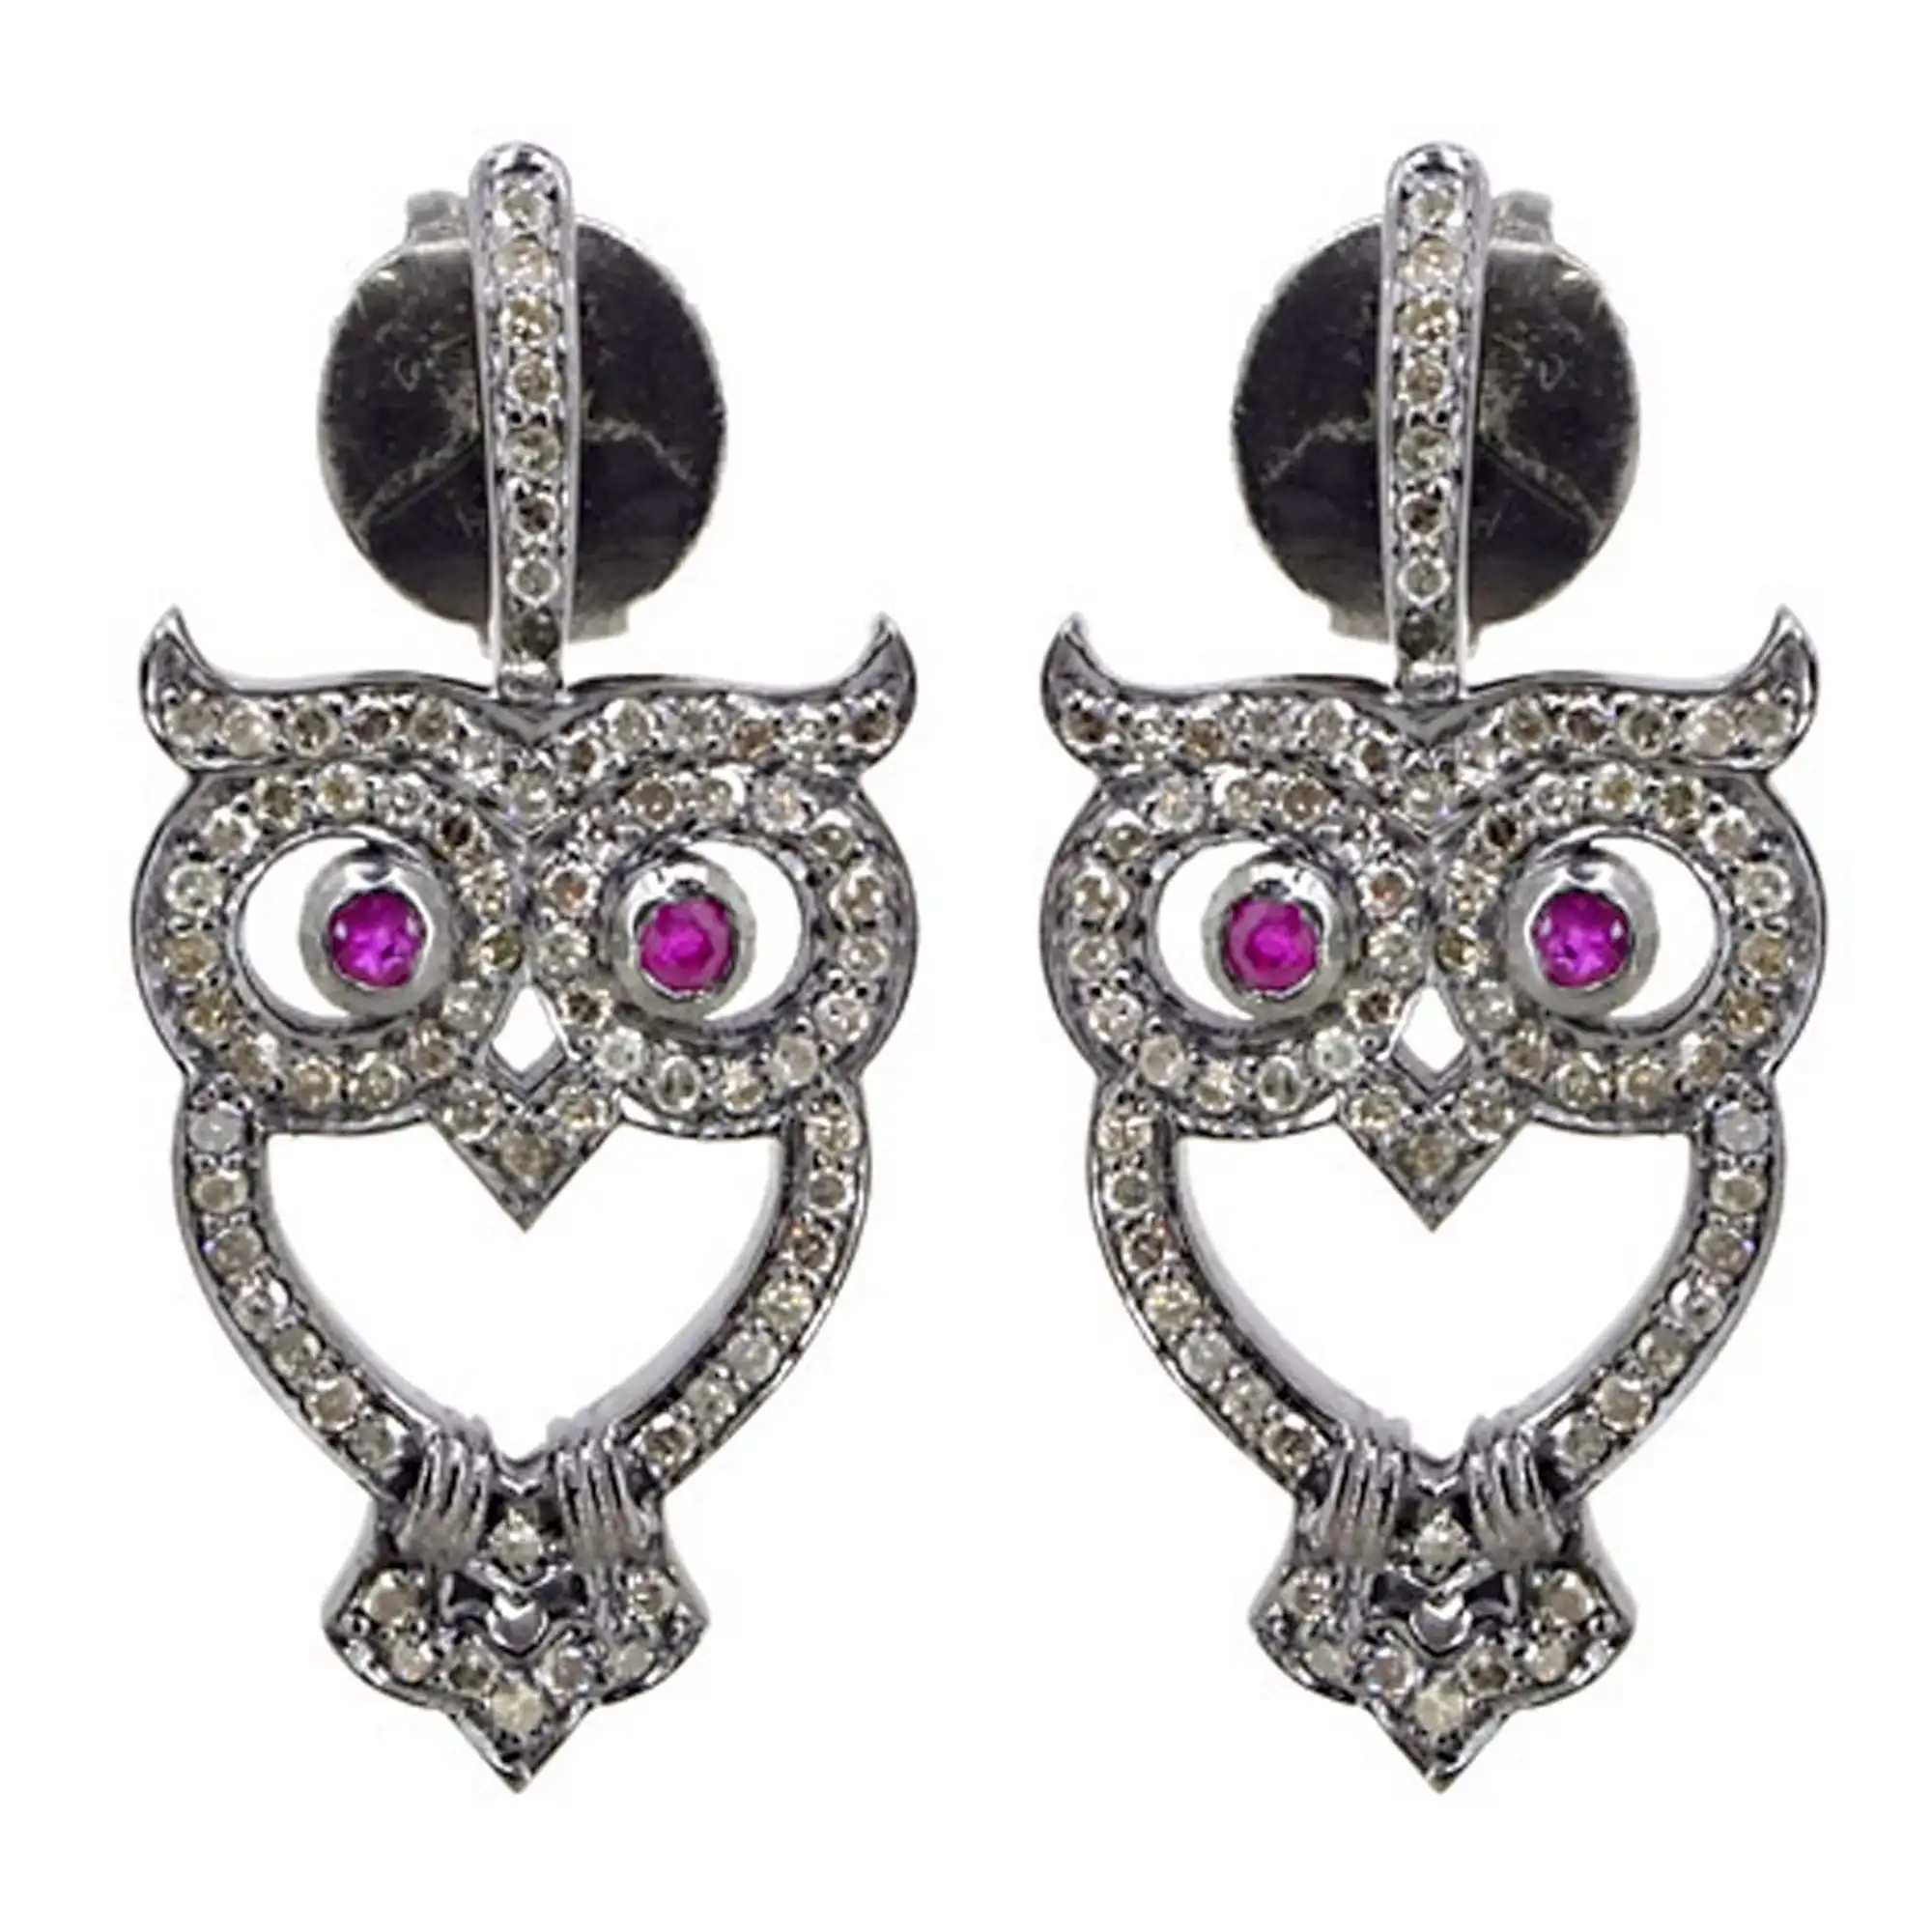 Owl Earrings in 14k Yellow Gold and 925 Sterling Silver with Ruby Natural Pave Diamond Stud Earrings Fine Jewelry Manufacturer